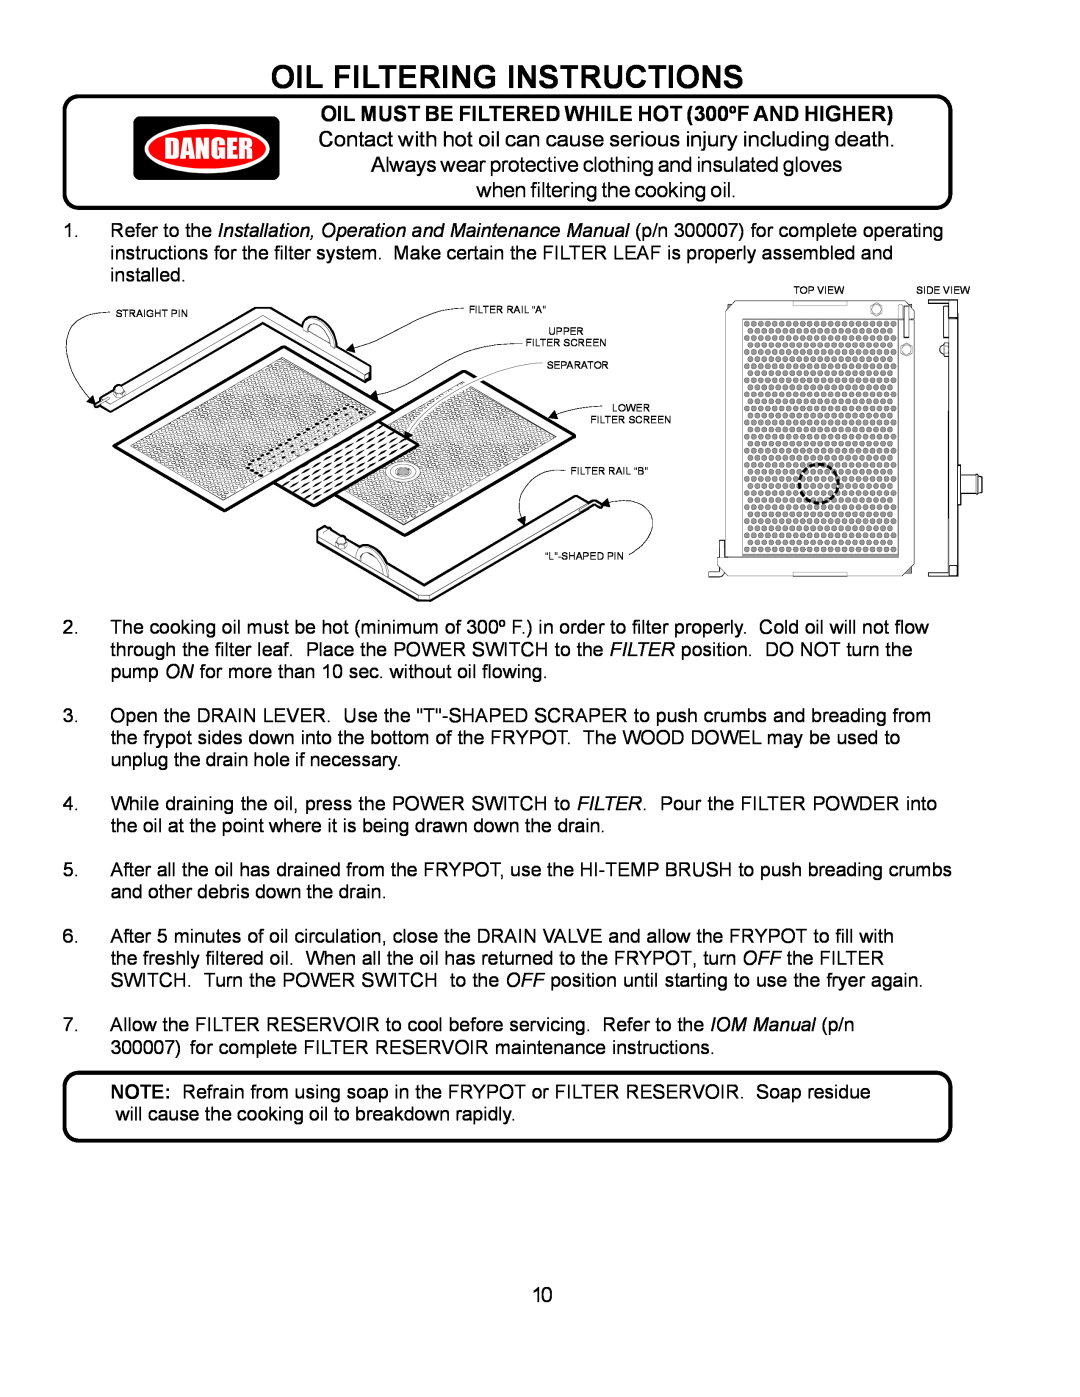 Wells WFGA-60FS service manual Oil Filtering Instructions, Danger, Always wear protective clothing and insulated gloves 